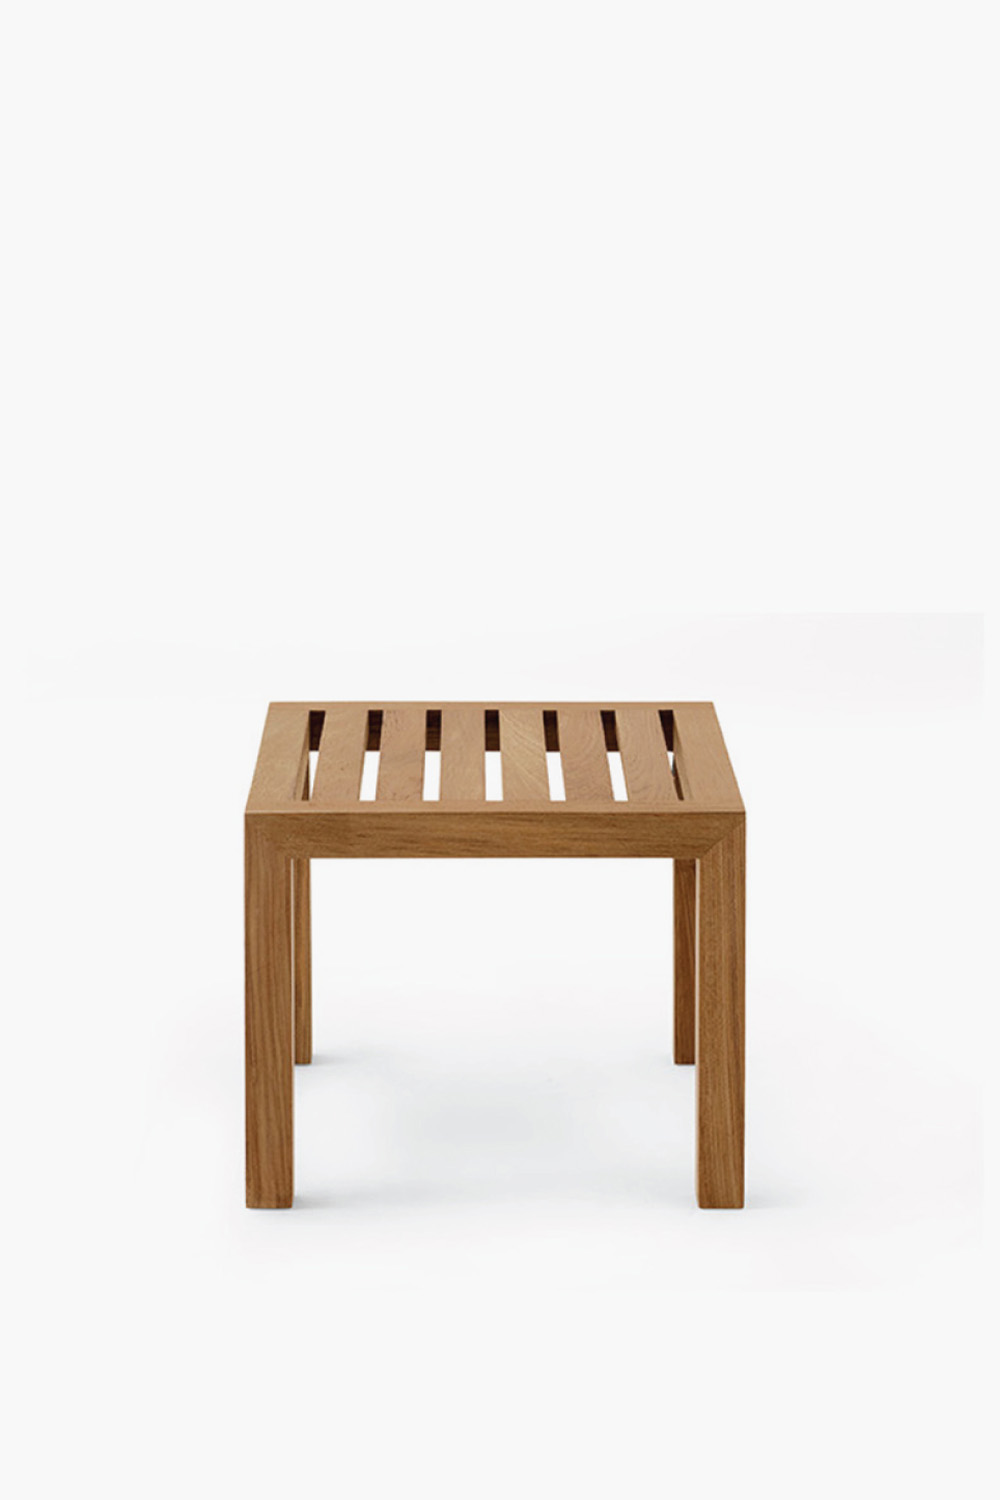 RODA Low Table Benches Network 01